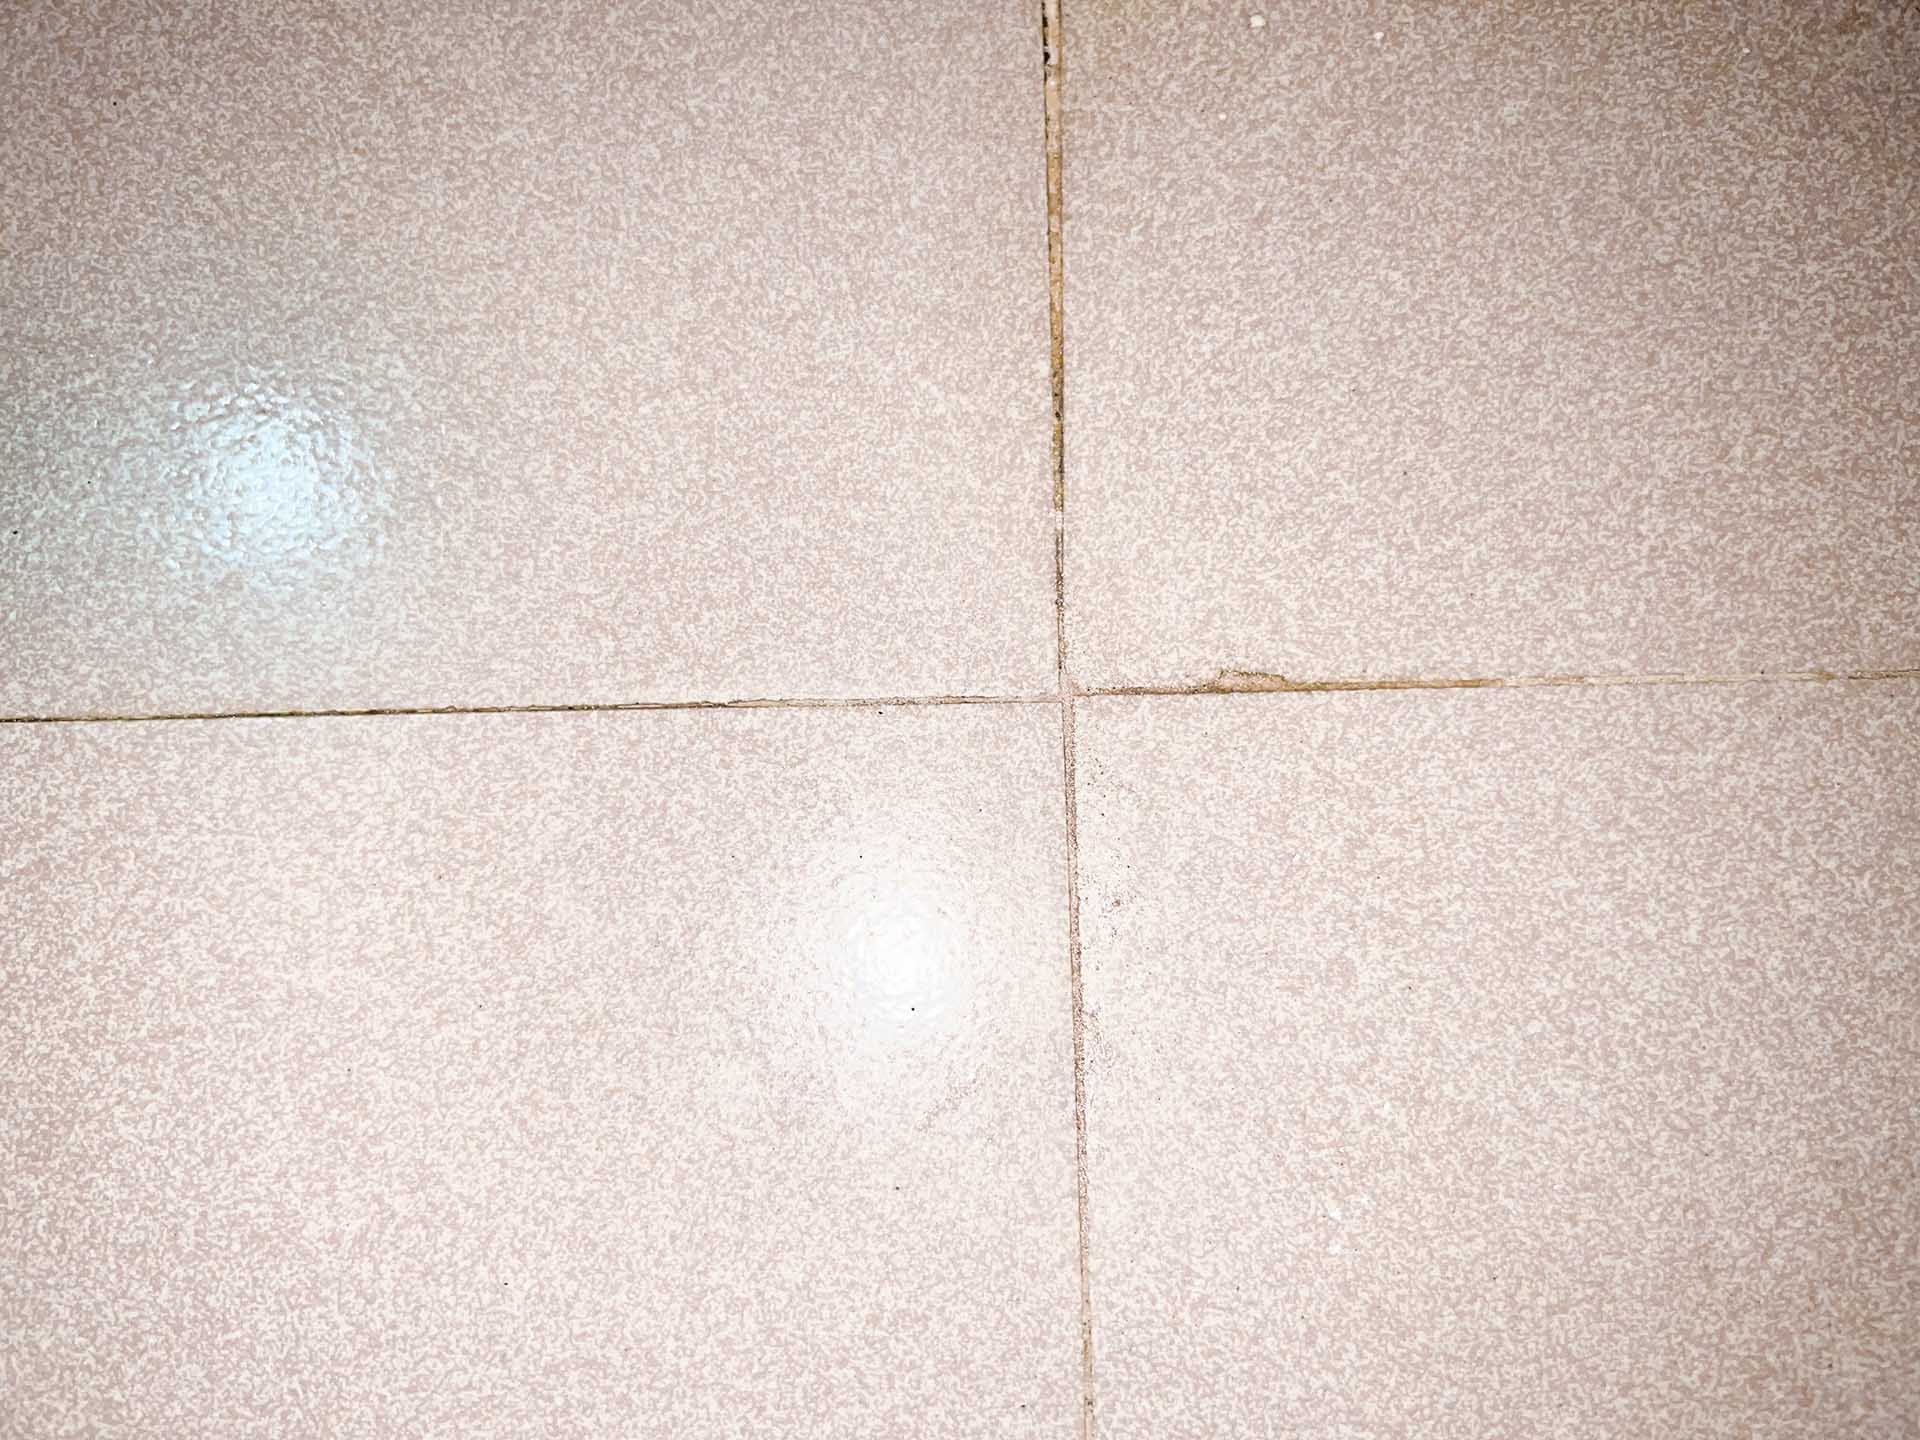 How To Protect Bathroom Floor From Urine?